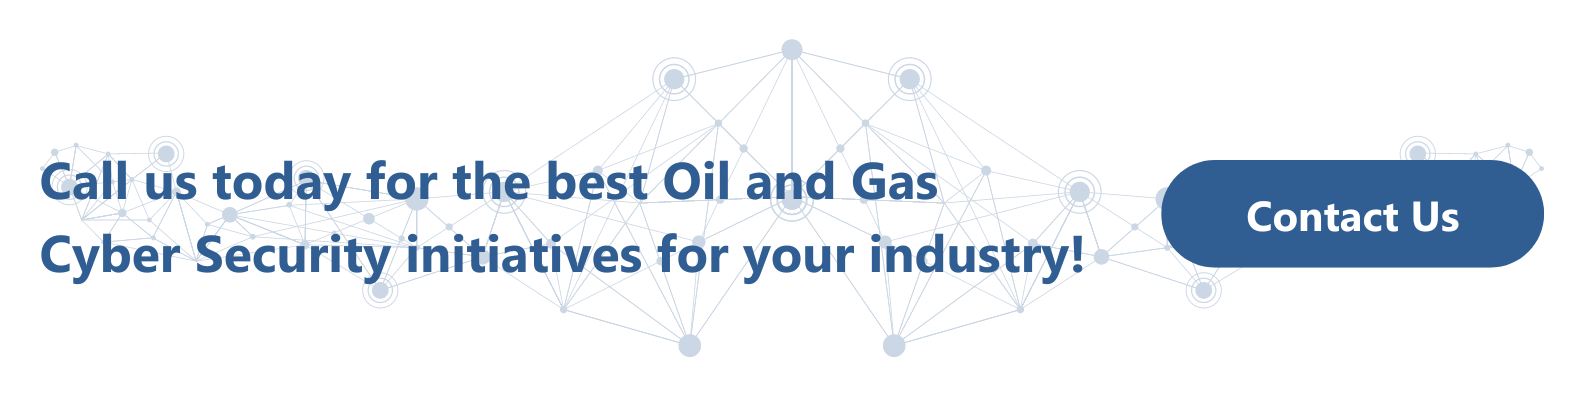 Call us today for the best Oil and Gas Cyber Security initiatives for your industry!